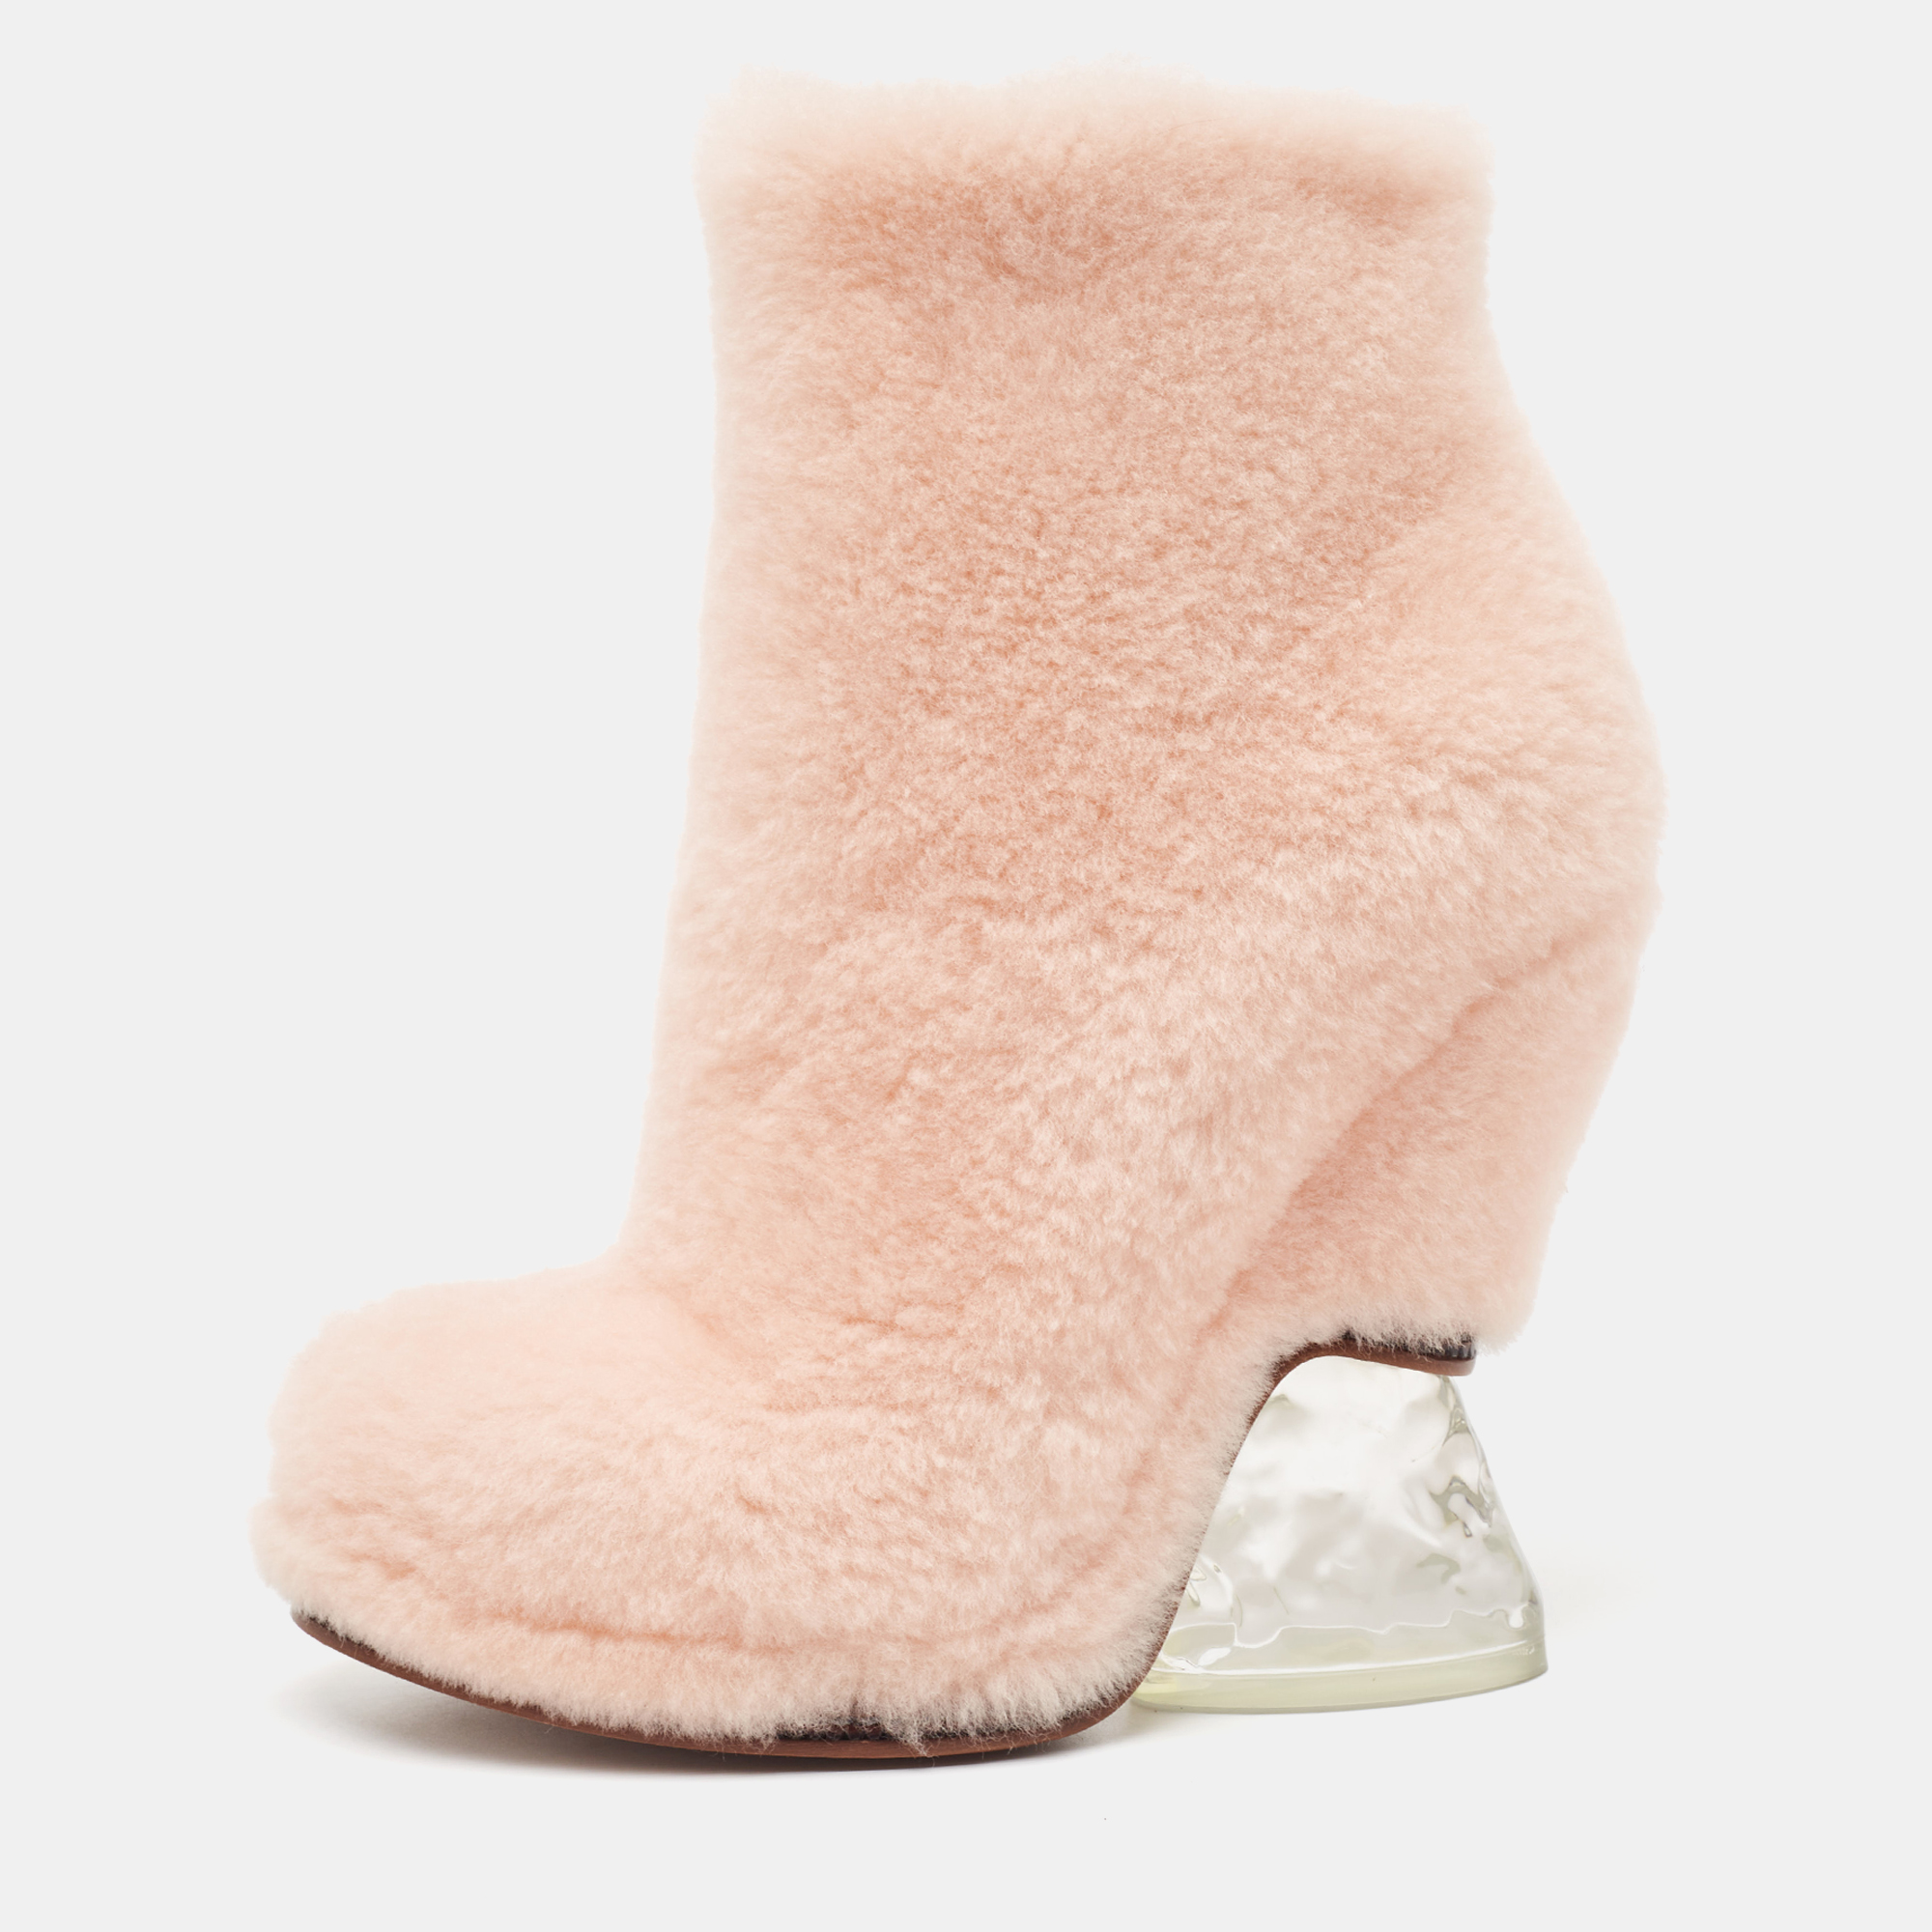 Fendi light pink shearling ice heel ankle boots size 38